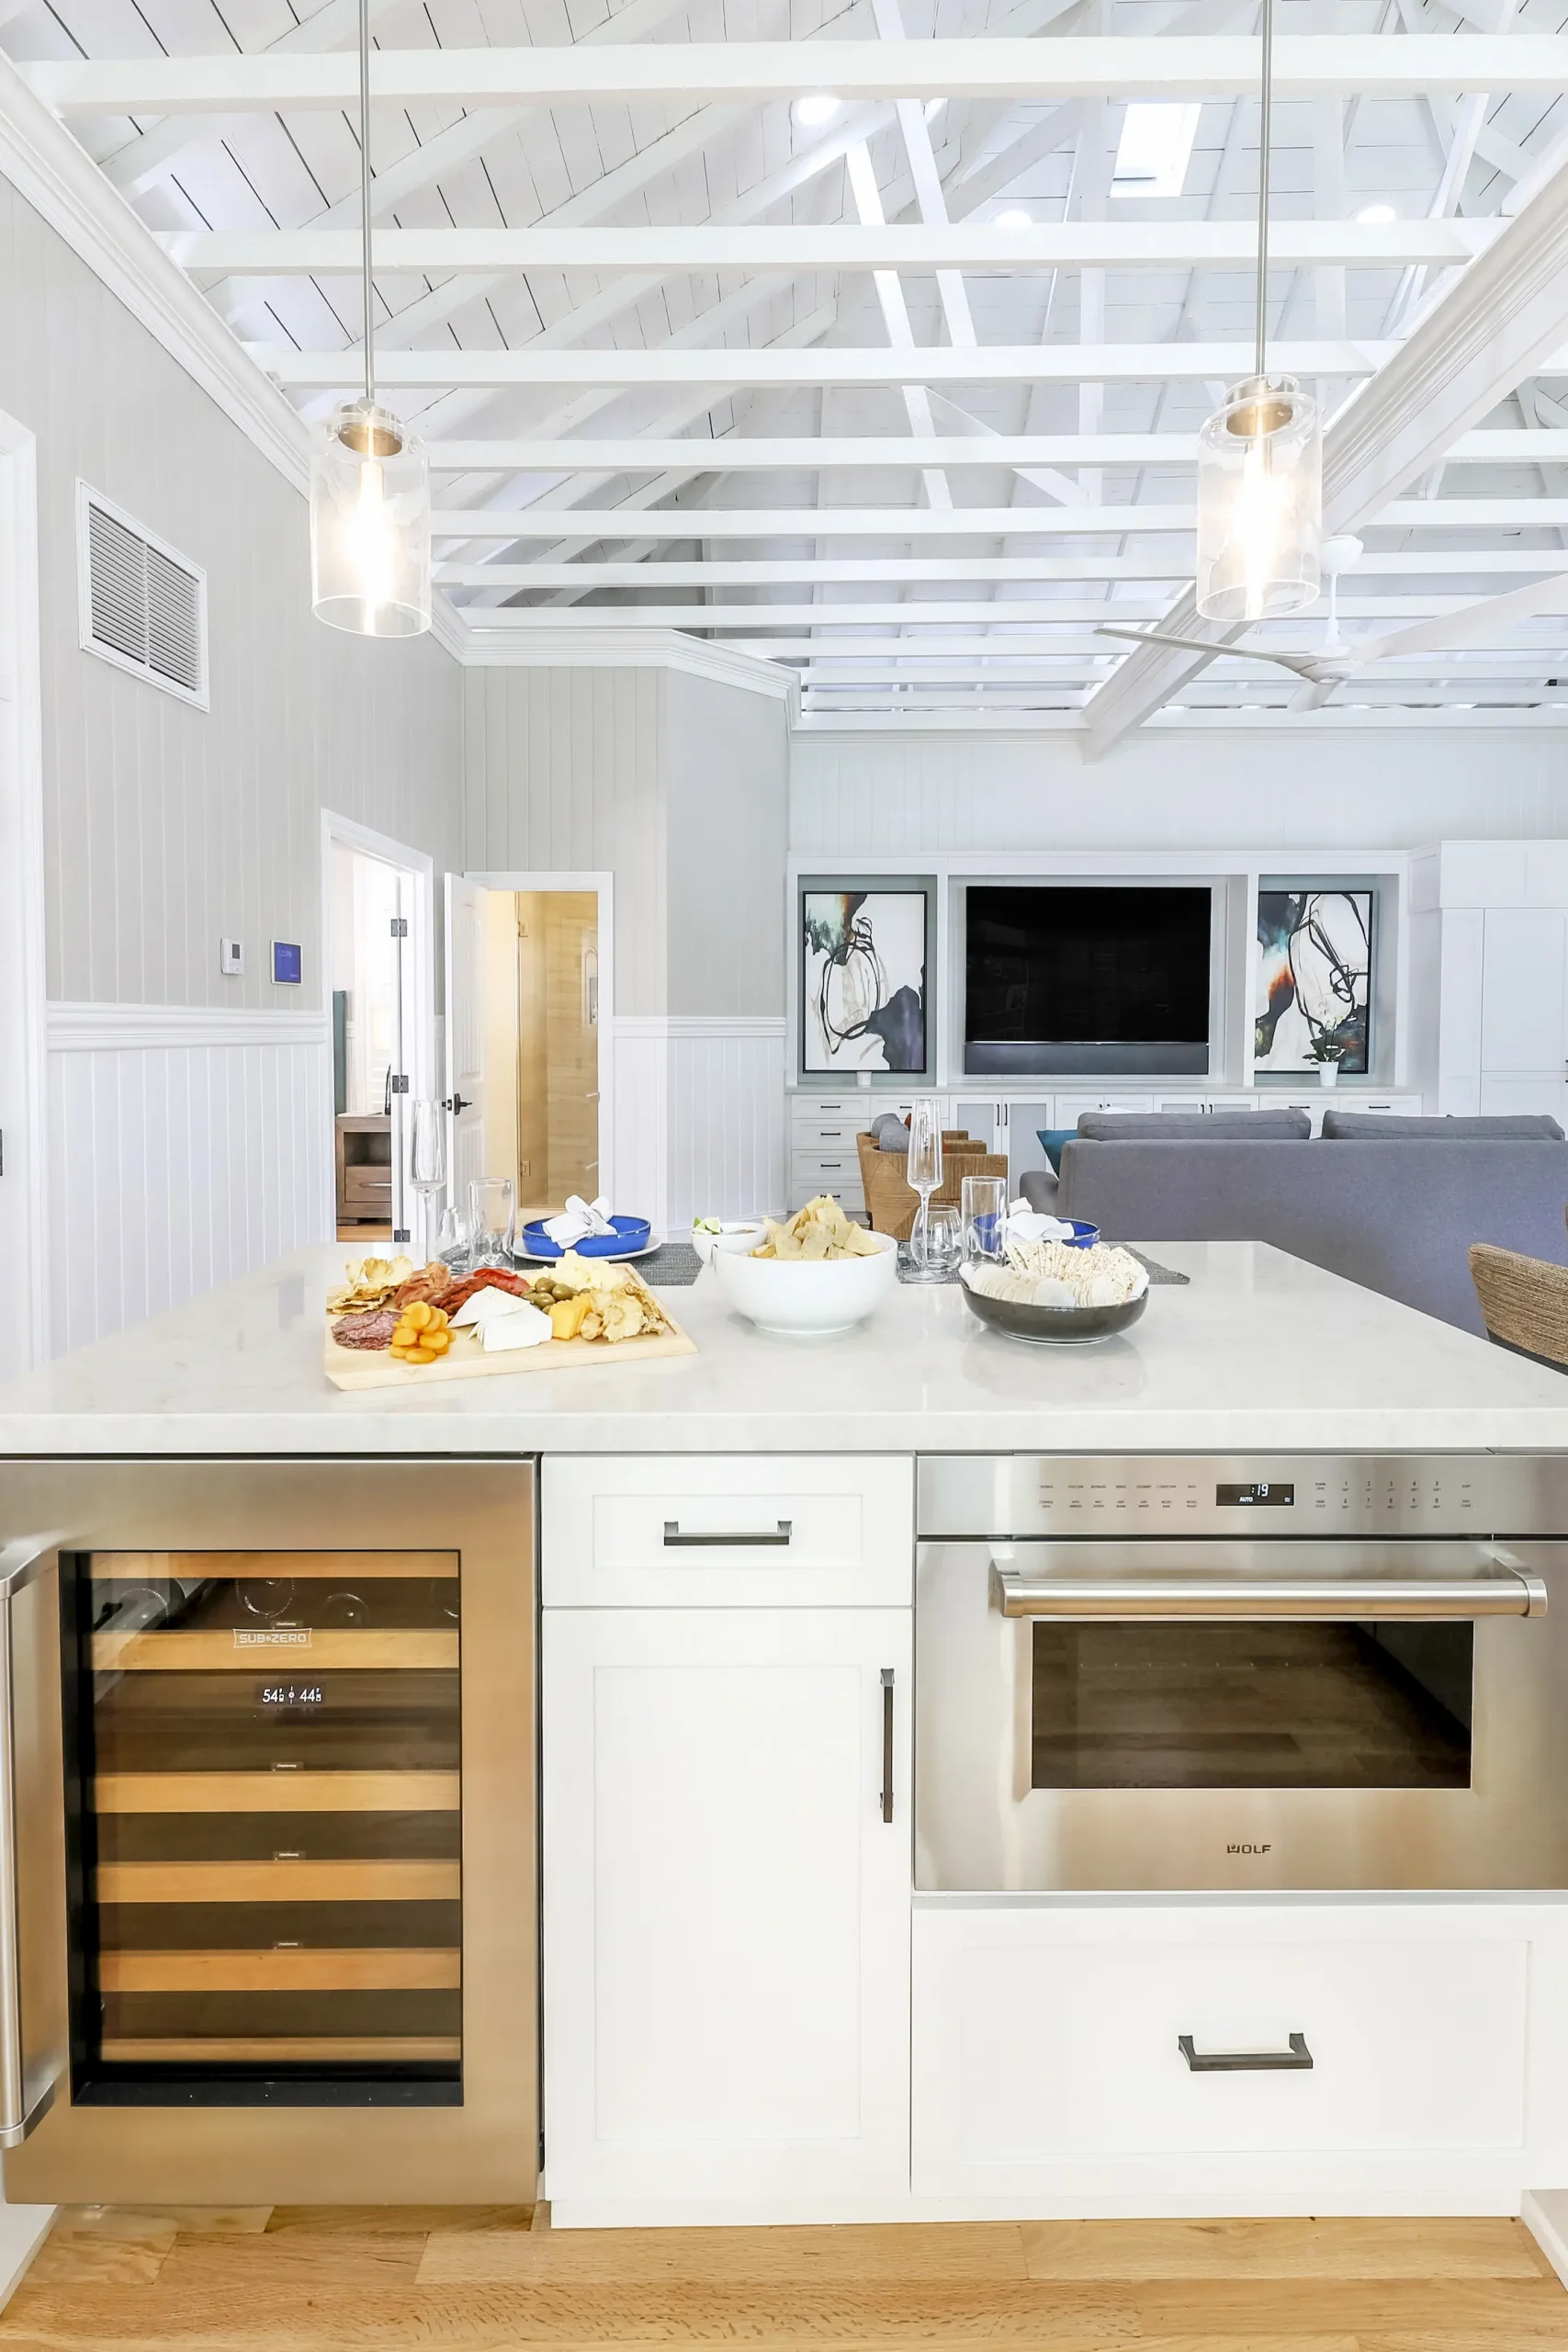 kitchen island with plated snacks and wine fridge